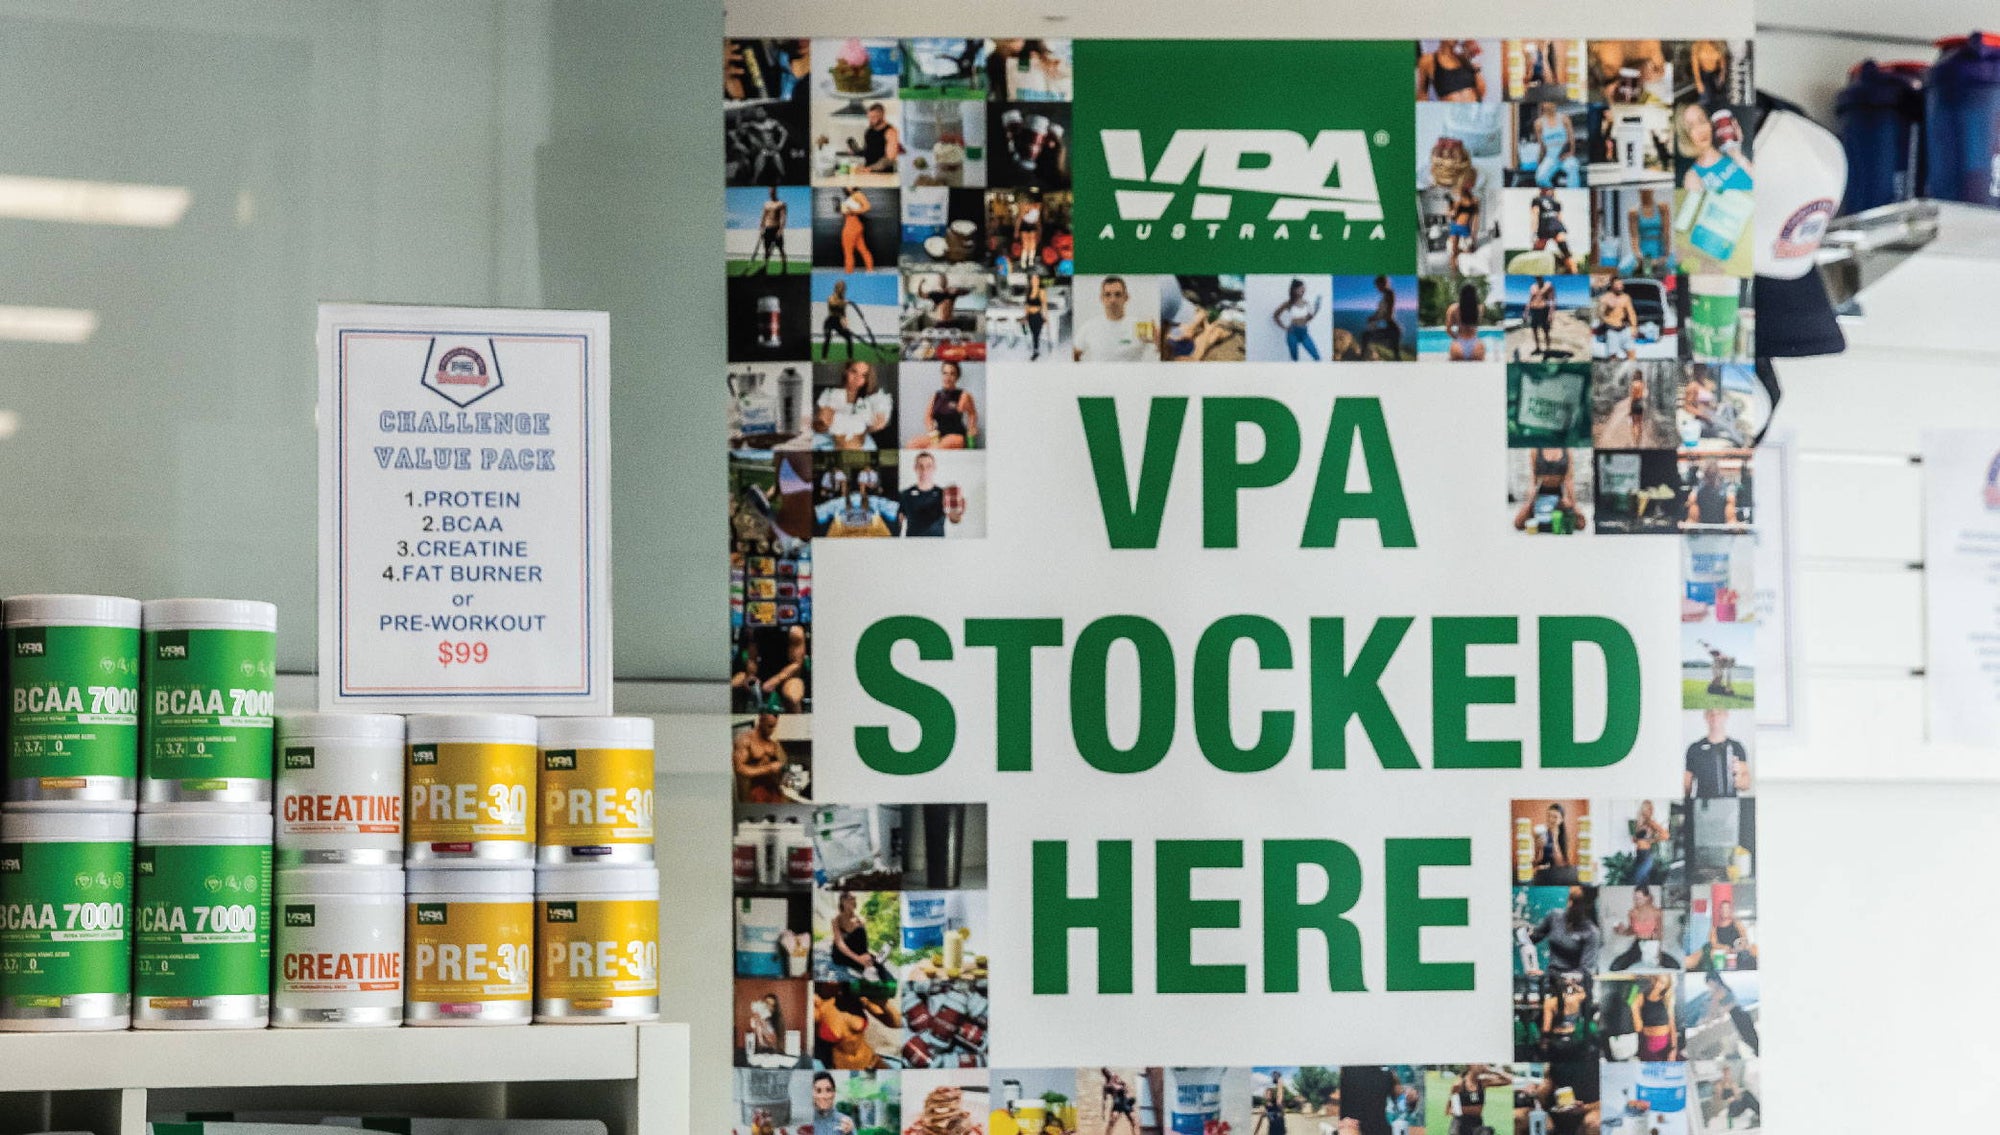 How to sell VPA supplements in your gym